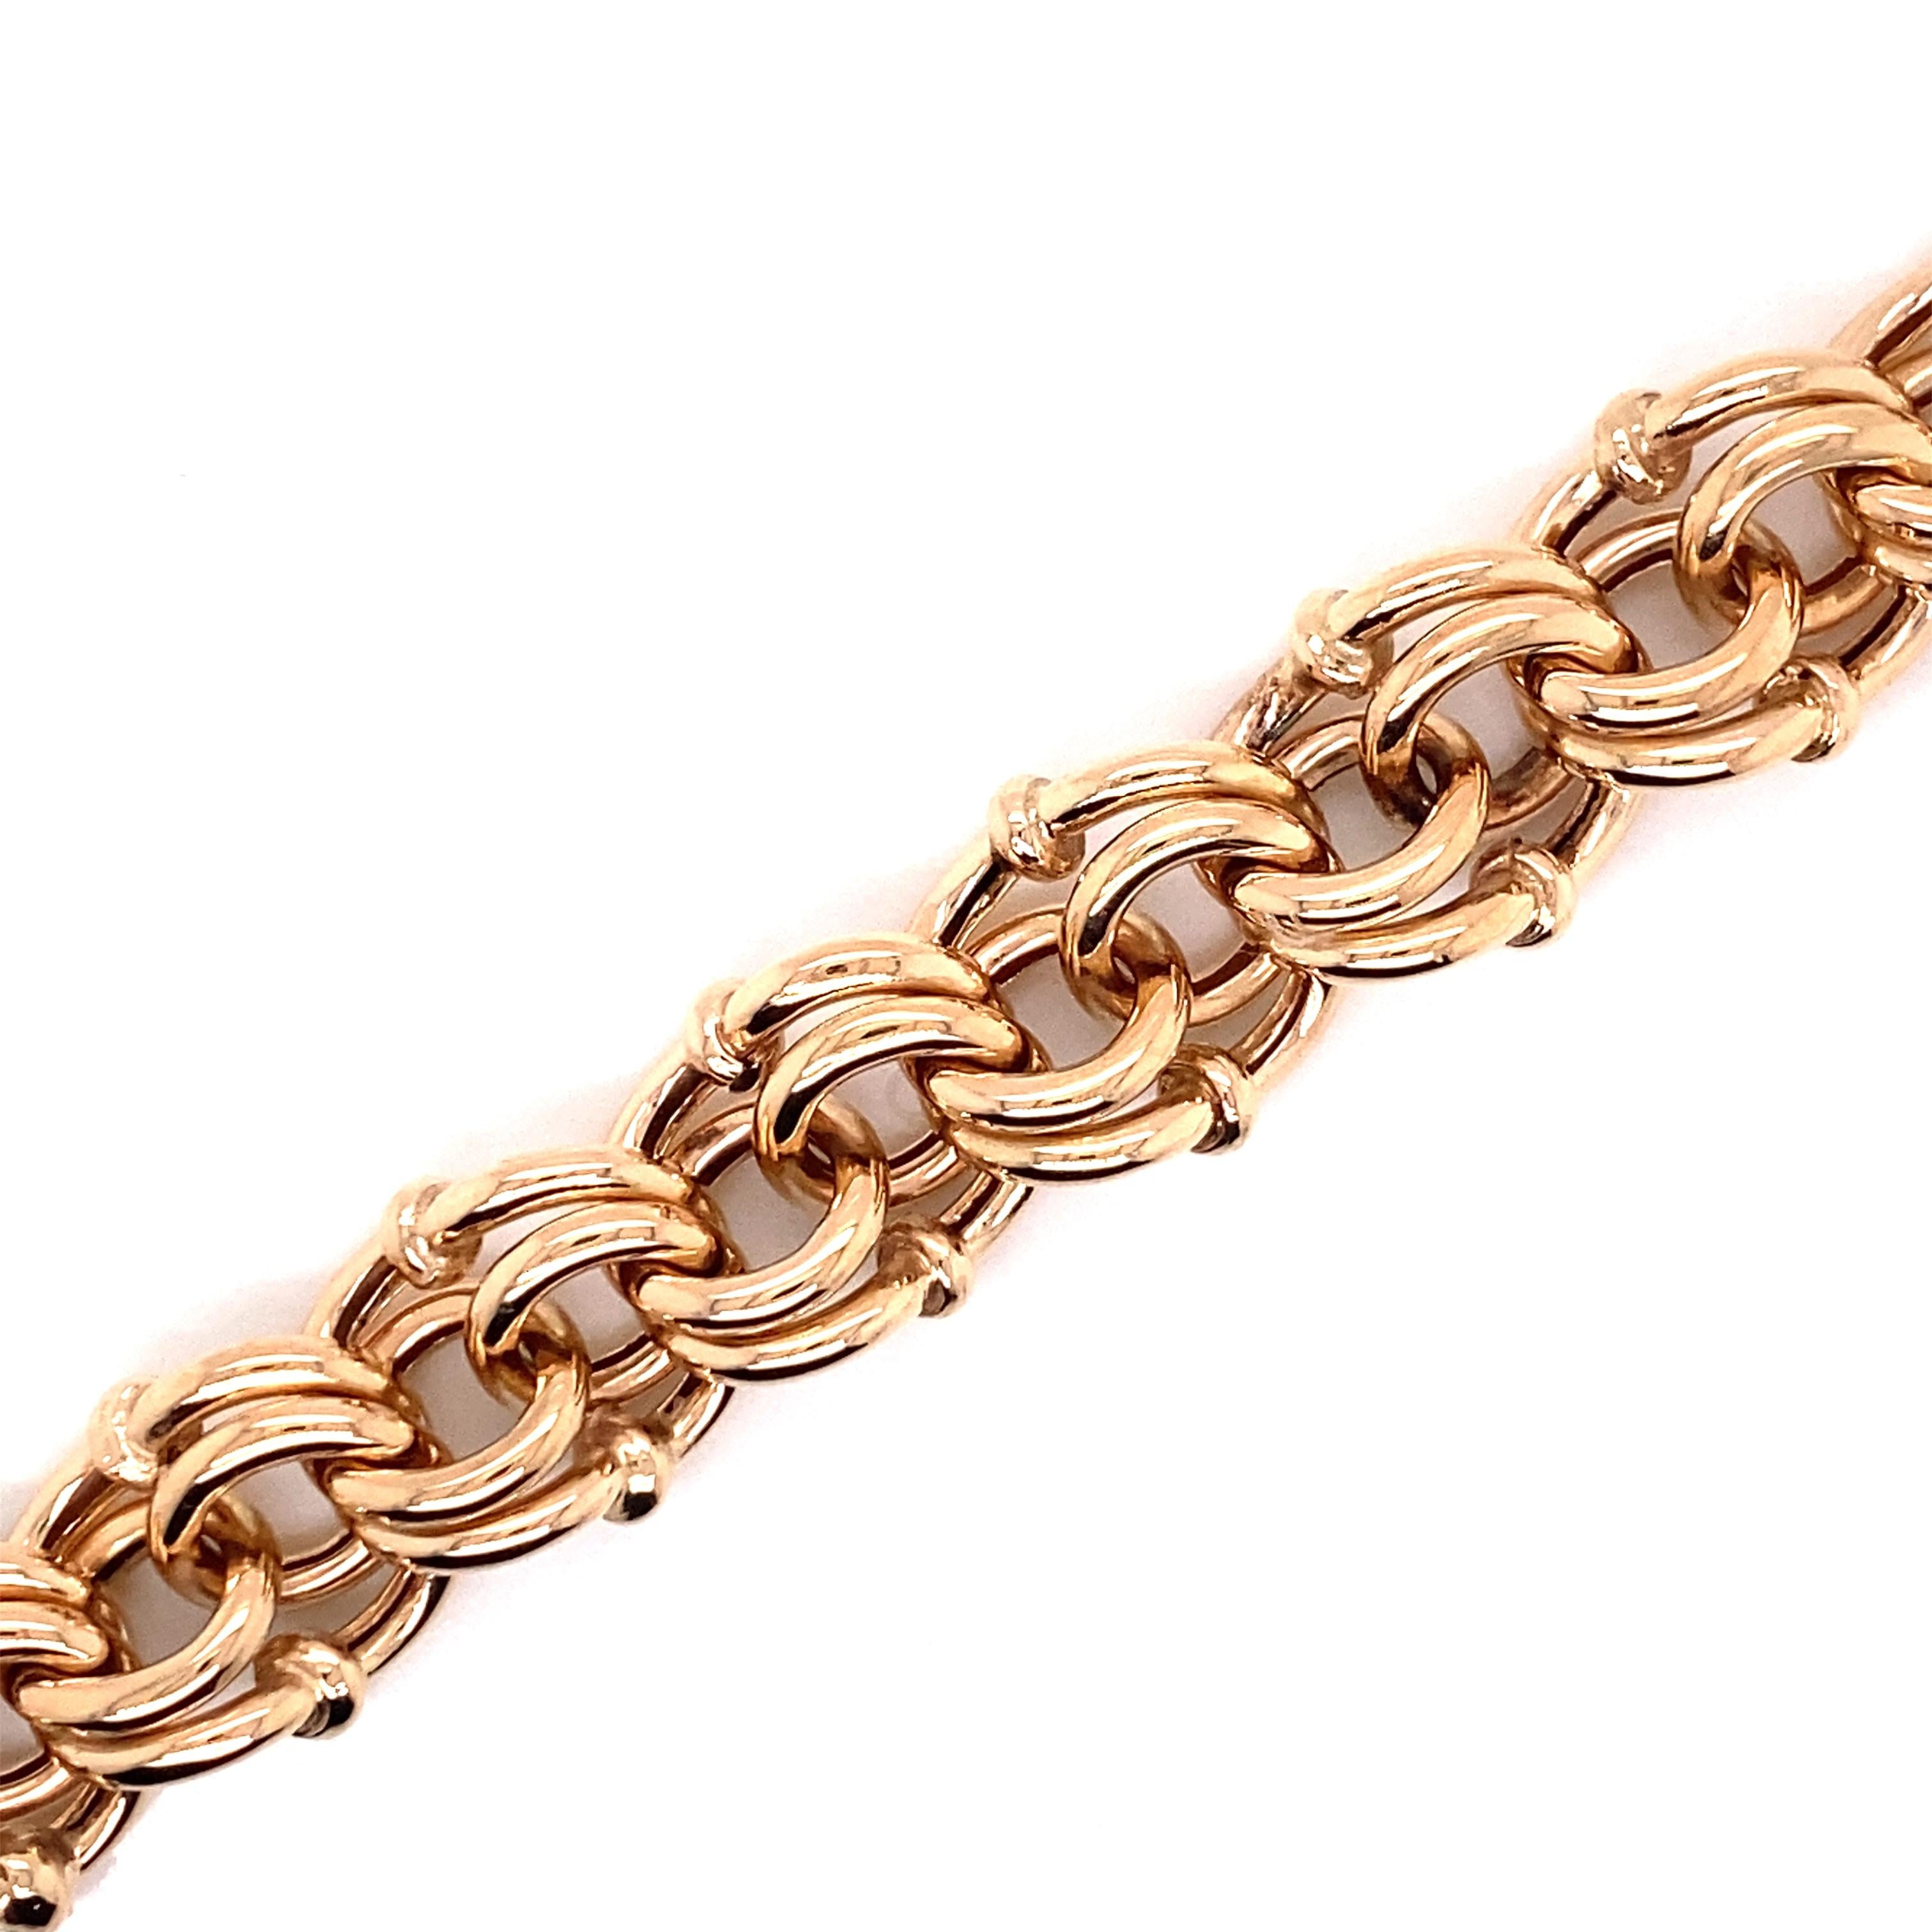 Vintage 1990's 14K Rose Gold Wide Charm Link Bracelet - The bracelet measures .5 inches wide and 8 inches long and features a hidden plunger clasp with a safety latch. The bracelet weighs 26.63 grams of gold. 